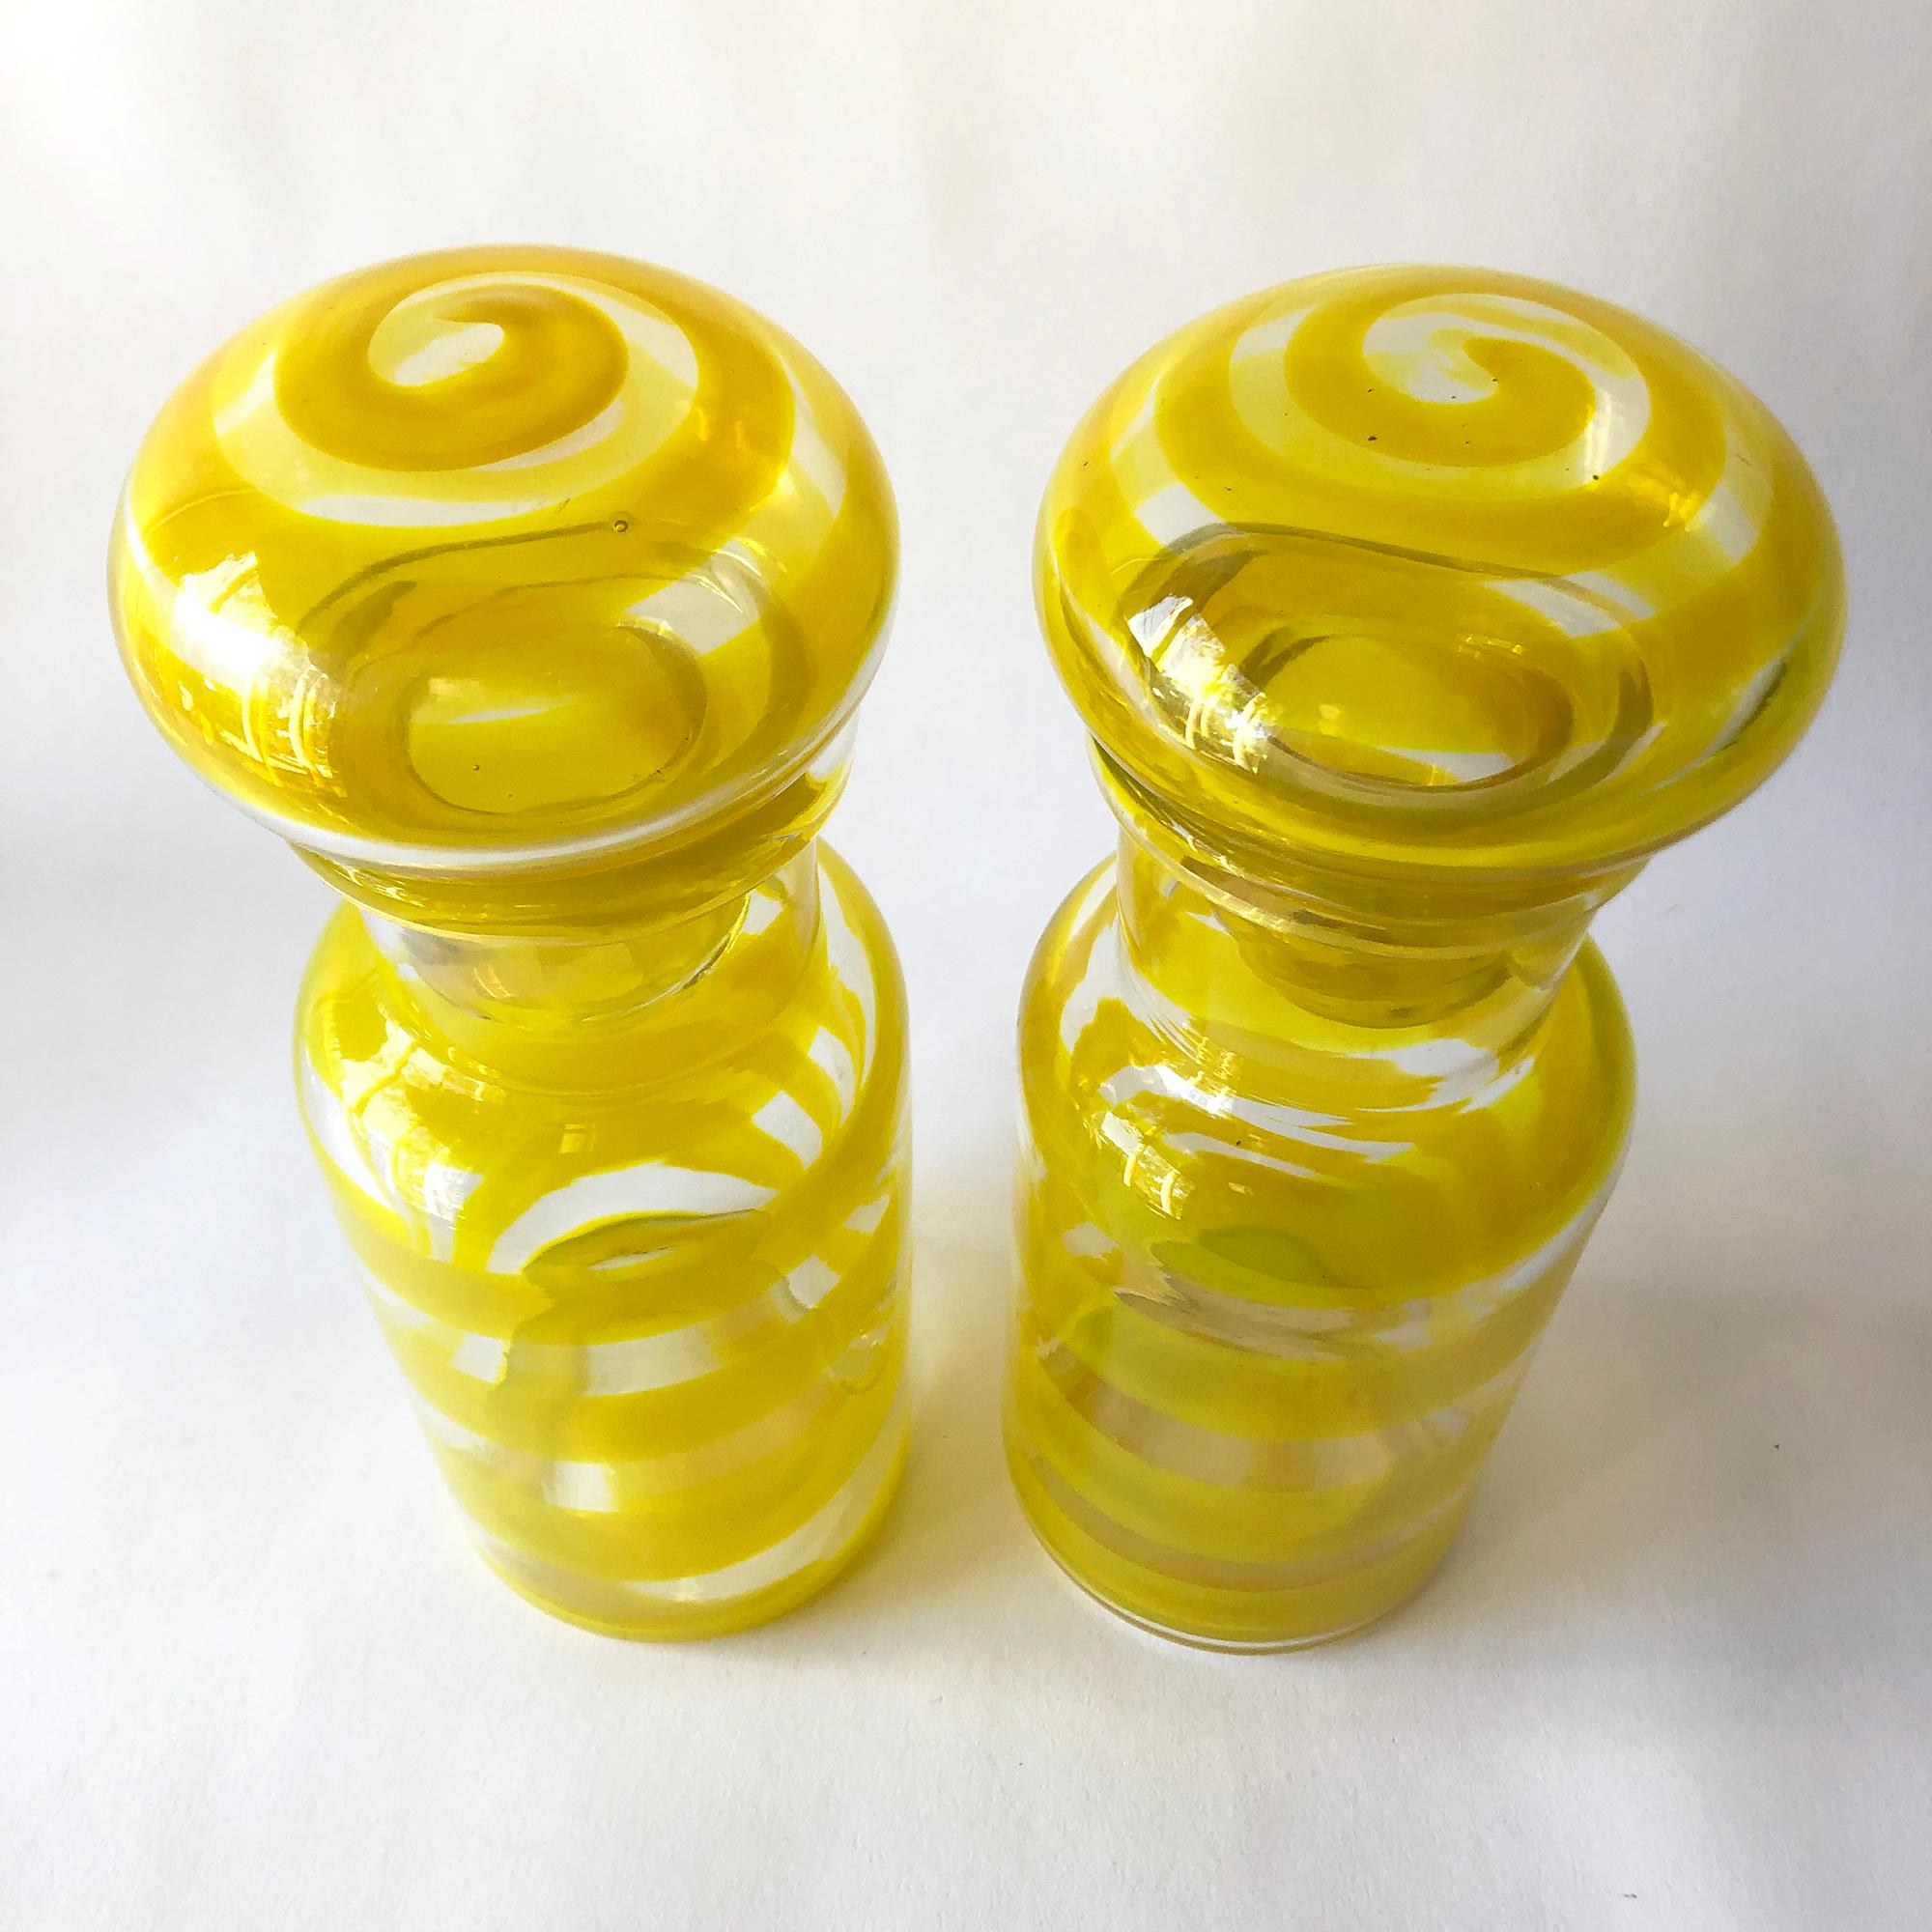 Pair of European modernist swirled blown glass decanters with mushroom stoppers, circa 1970's. Decanters measure 9.75